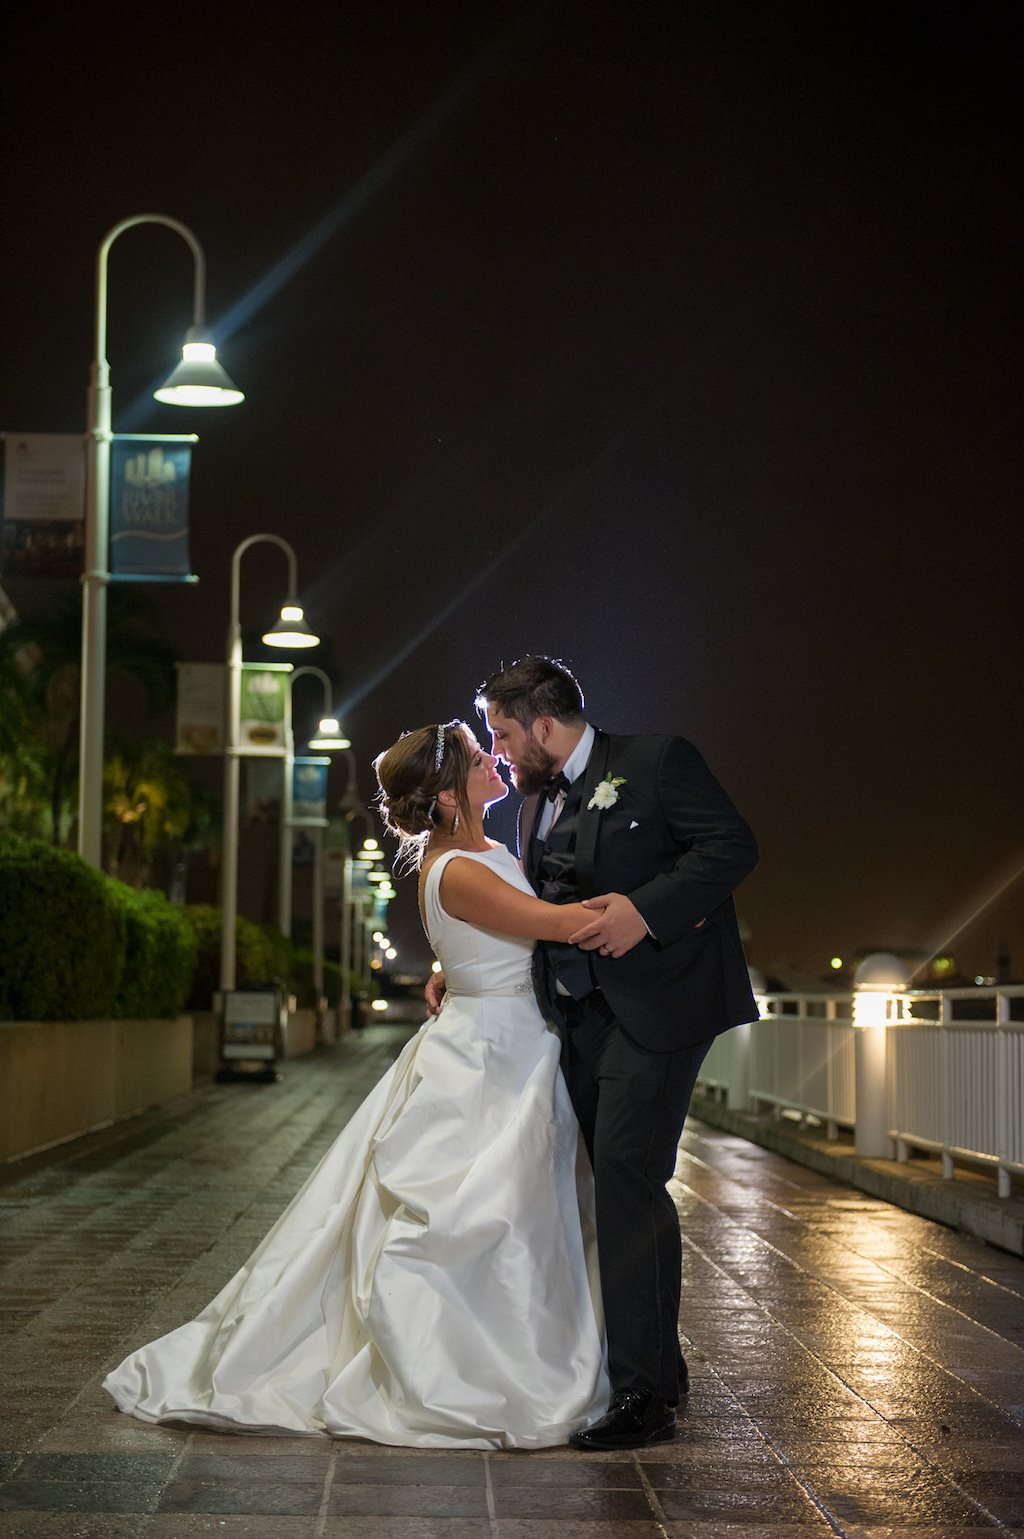 Outdoor Nighttime Downtown St Pete Bride and Groom Wedding Portrait, Bride in Belted Pronovias Wedding Dress | Tampa Bay Bridal Shop Isabel O'Neale Bridal | Tampa Wedding Photographer Andi Diamond Photography